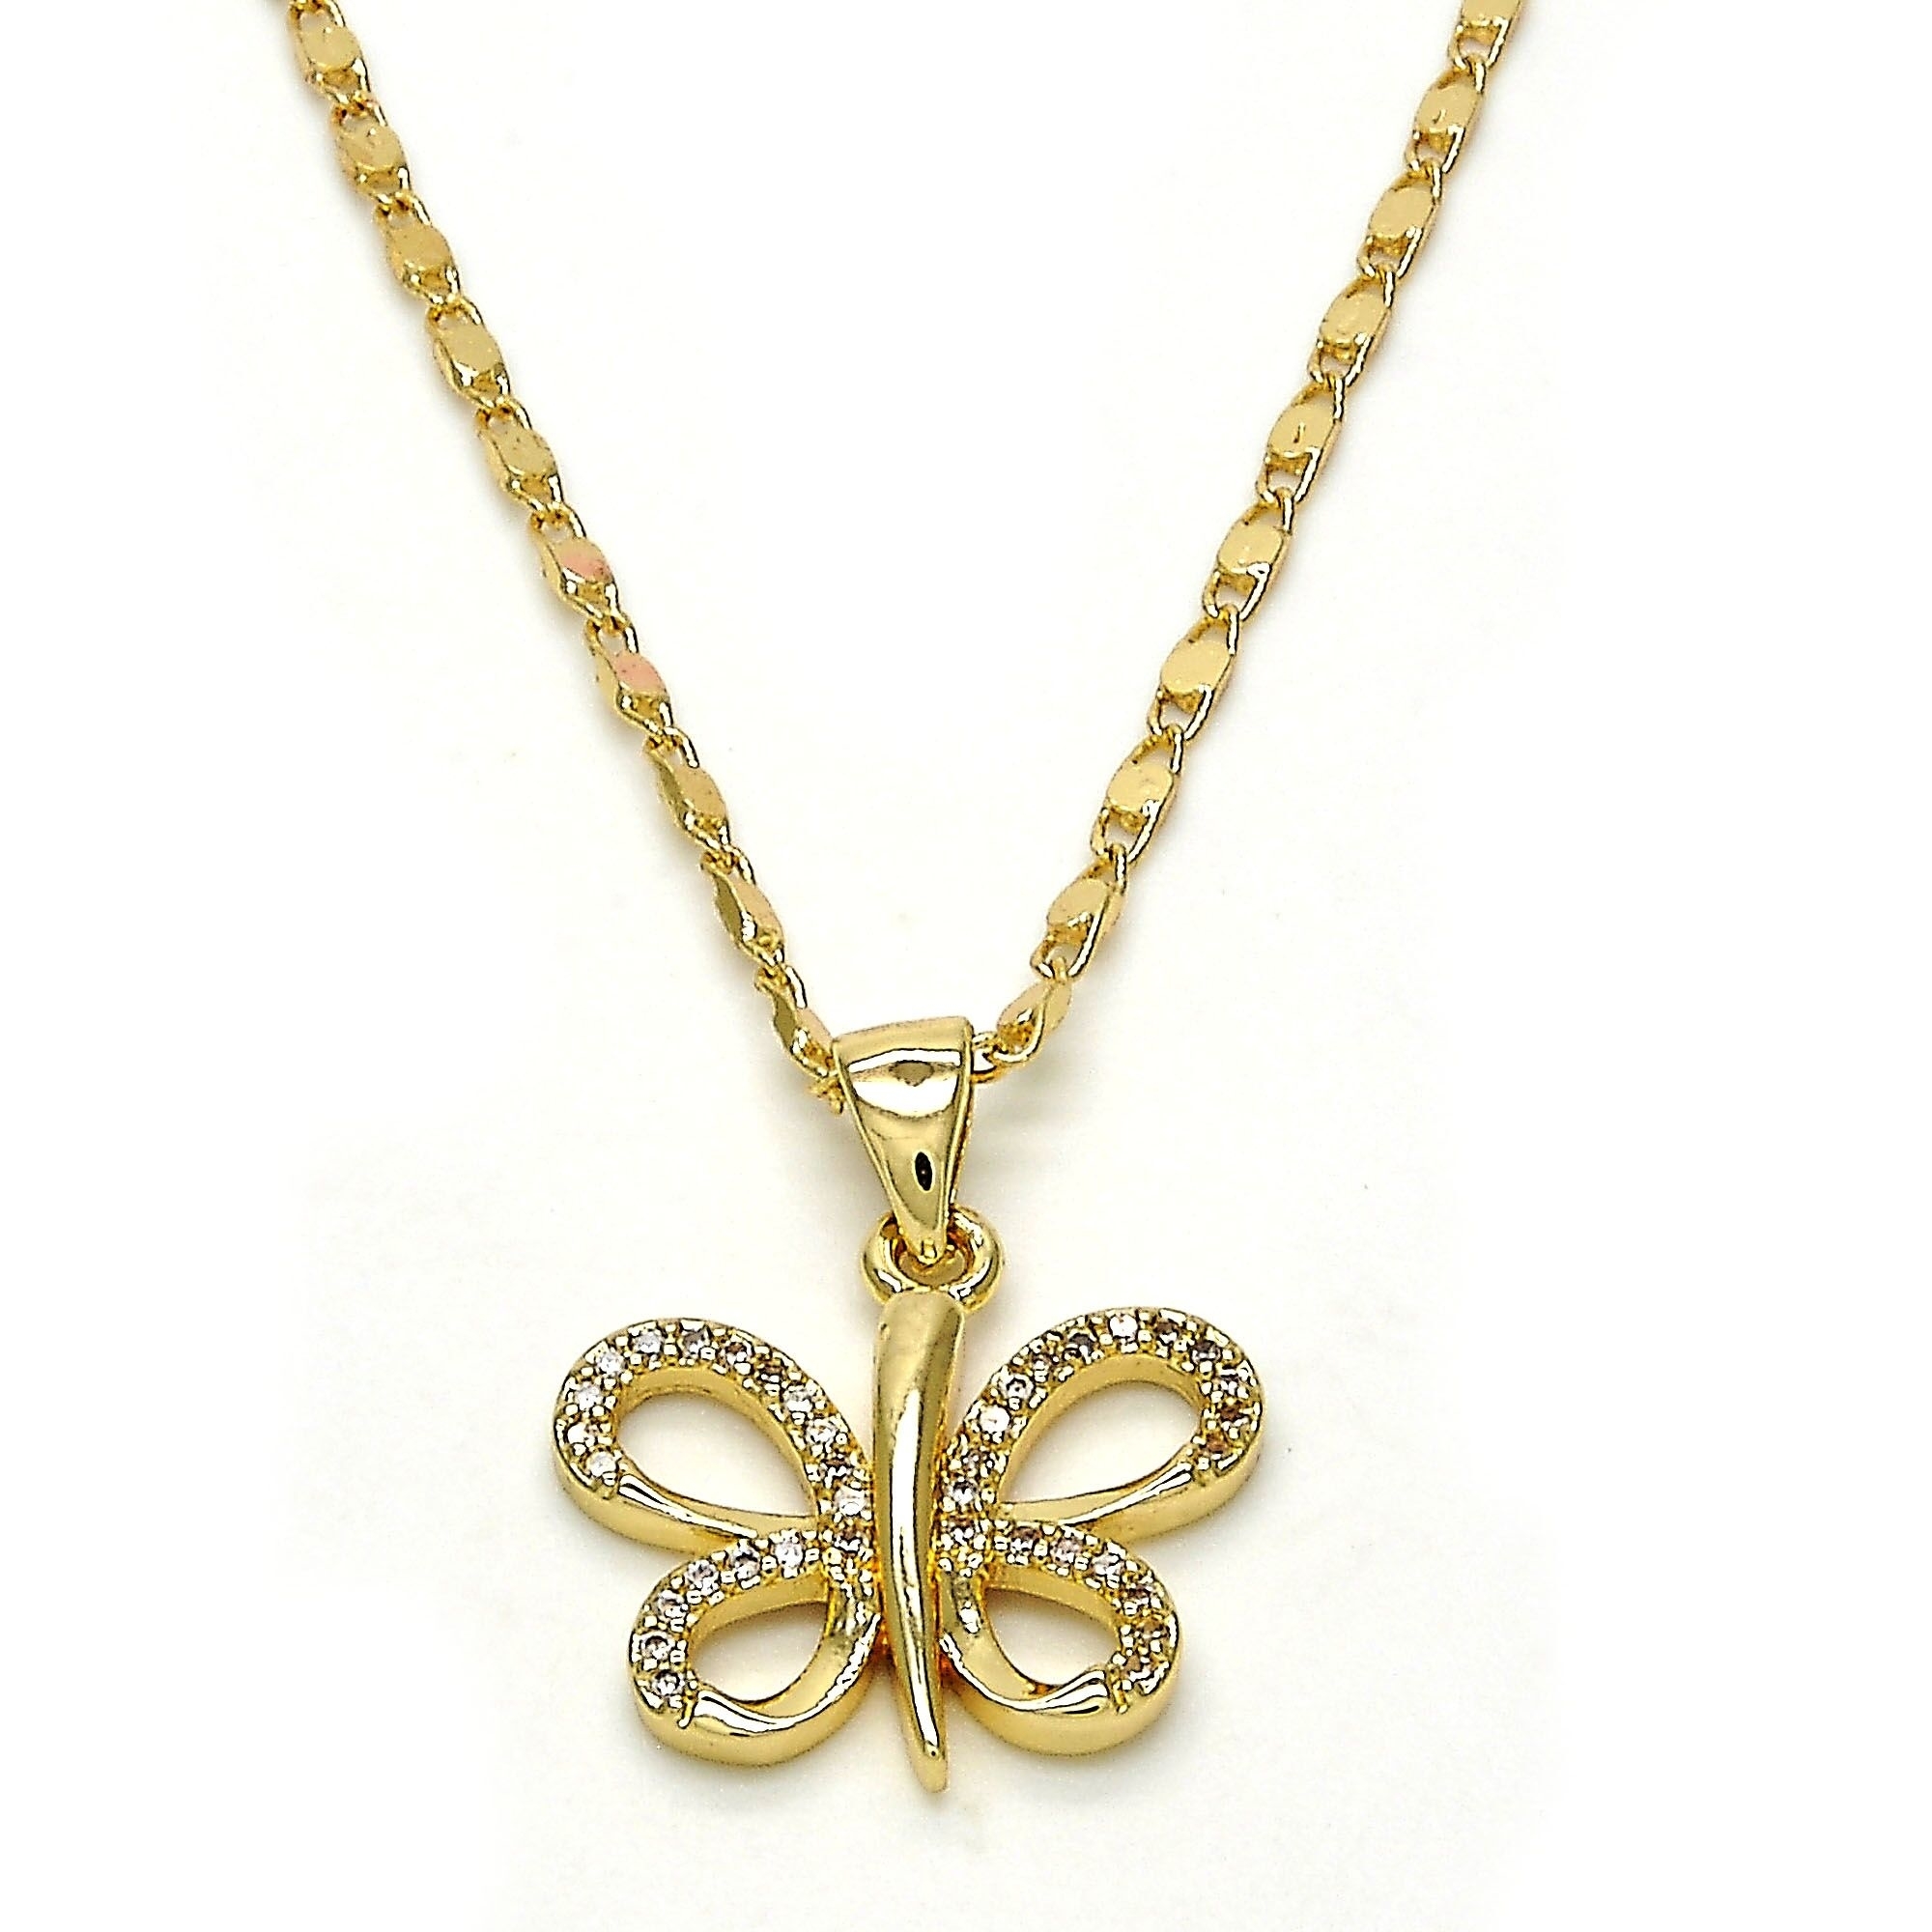 Gold Filled Fancy Necklace, Butterfly Design, With White Micro Pave, Polished Finish, Golden Tone